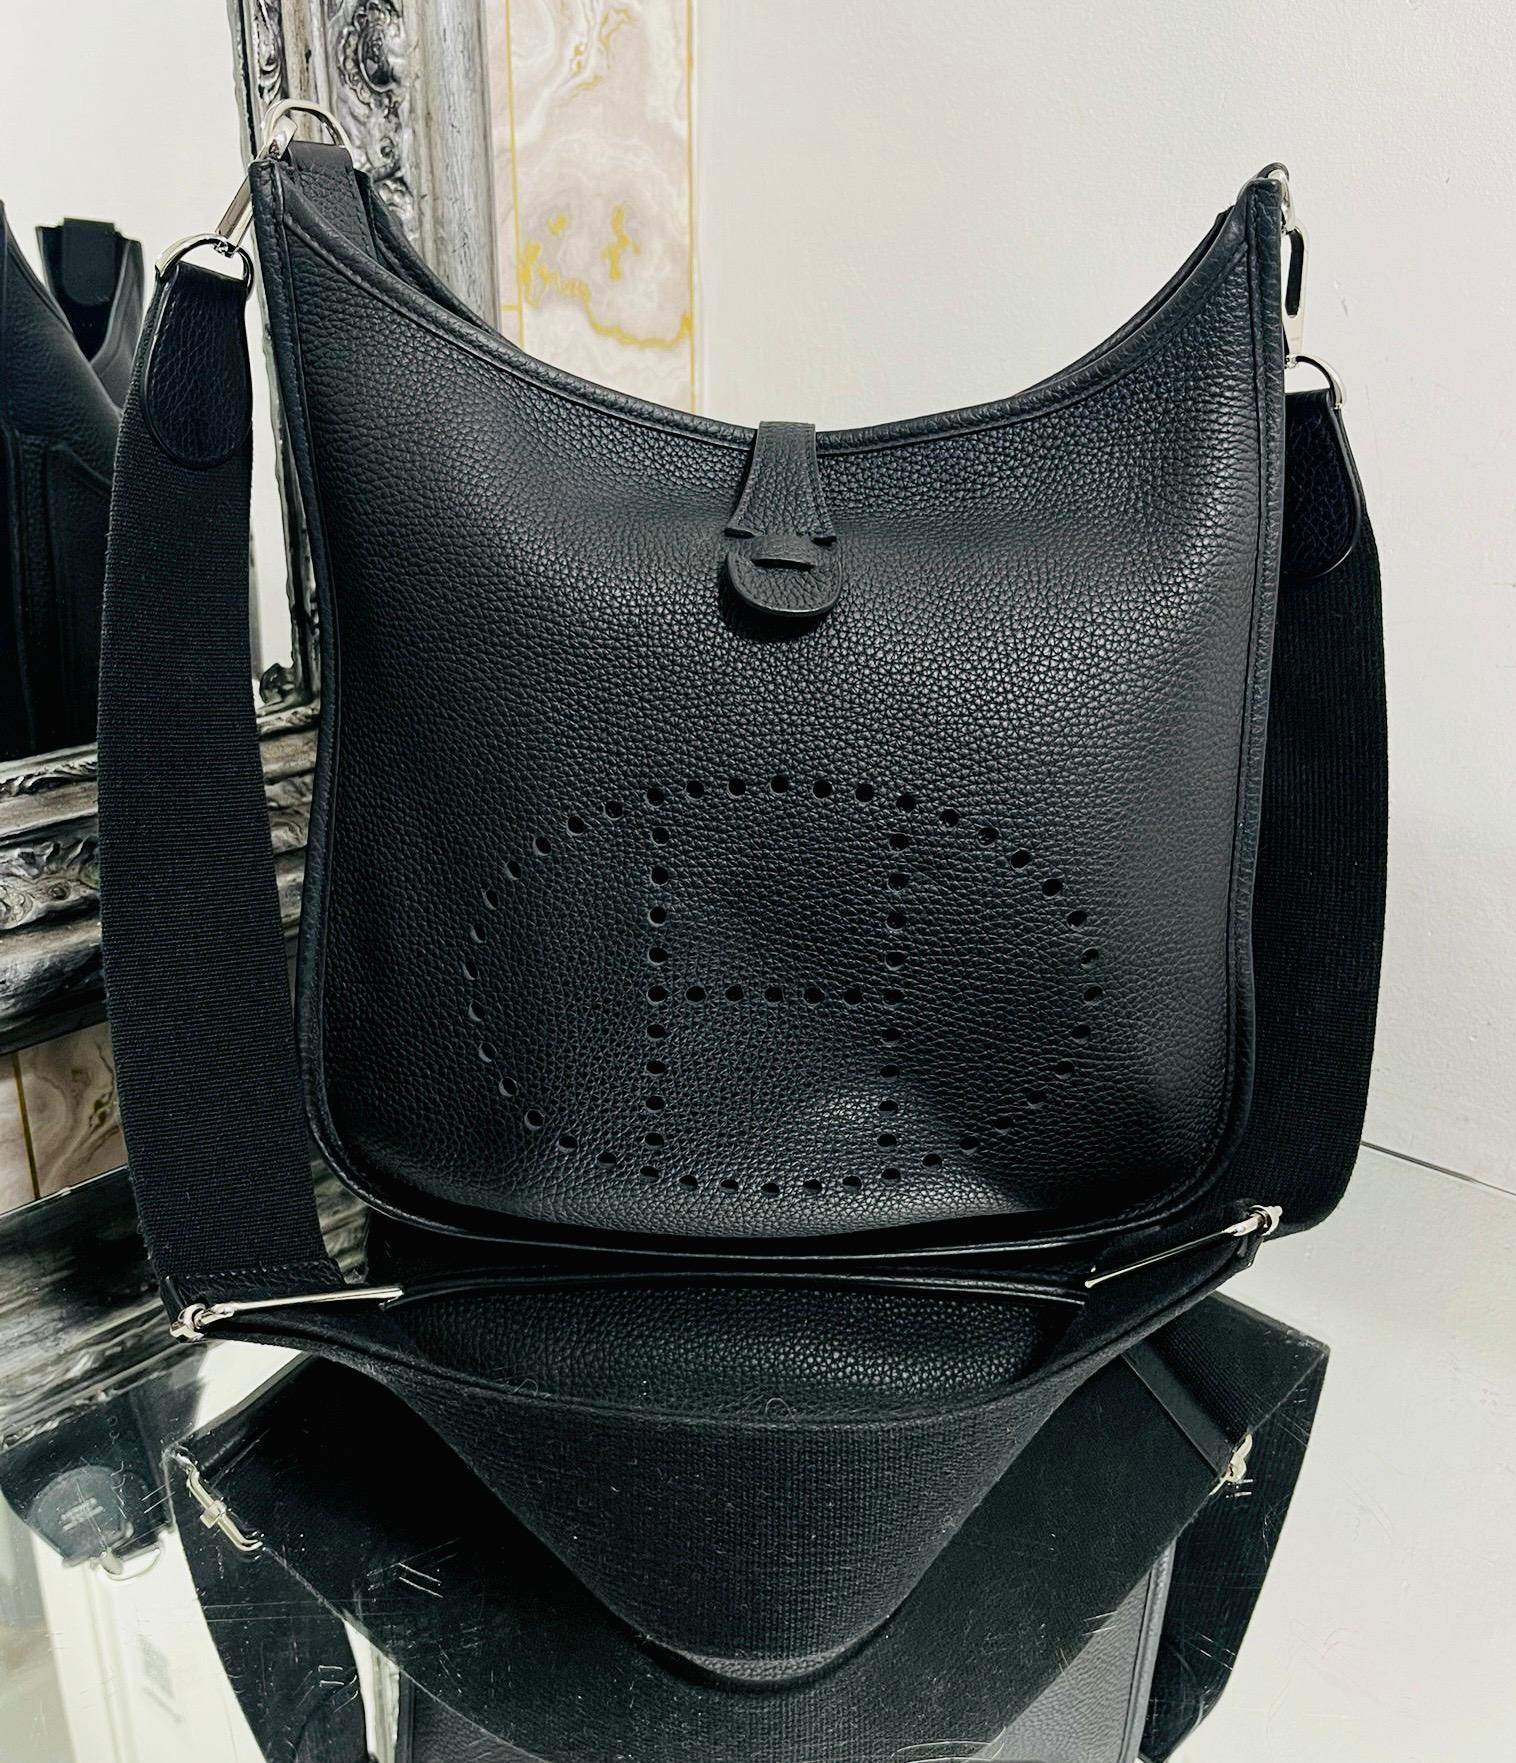 Discontinued Model - Hermes Evelyne III 29 Leather Bag

Black crossbody bag crafted from Taurillon Clemence leather.

Detailed with perforated leather 'H' logo at the front and patch pocket to rear.

Featuring leather tab closure and palladium